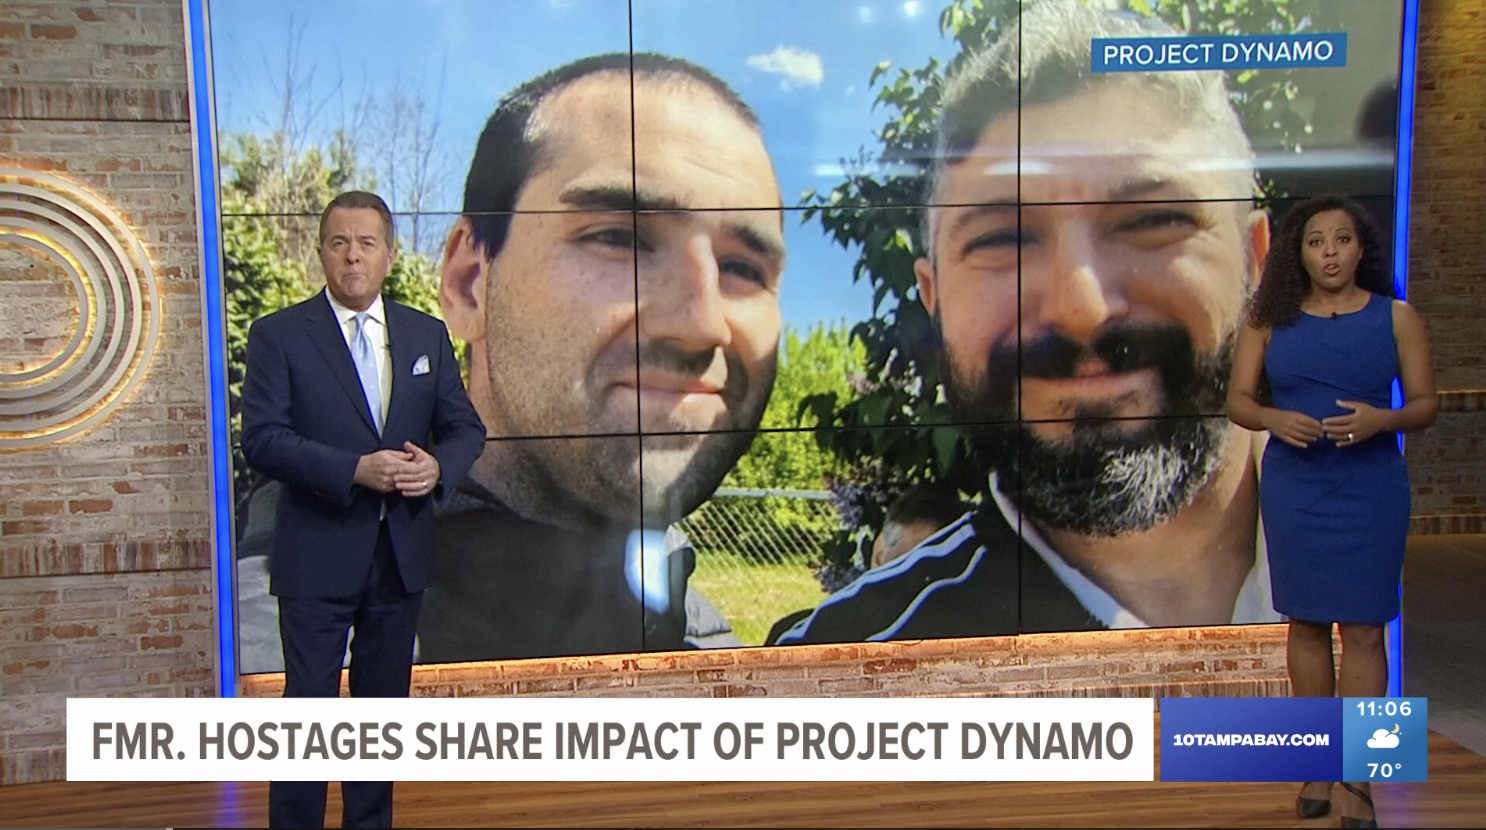 10 Tampa Bay- Hostage survivors share stories as Project DYNAMO fundraises to save more Americans